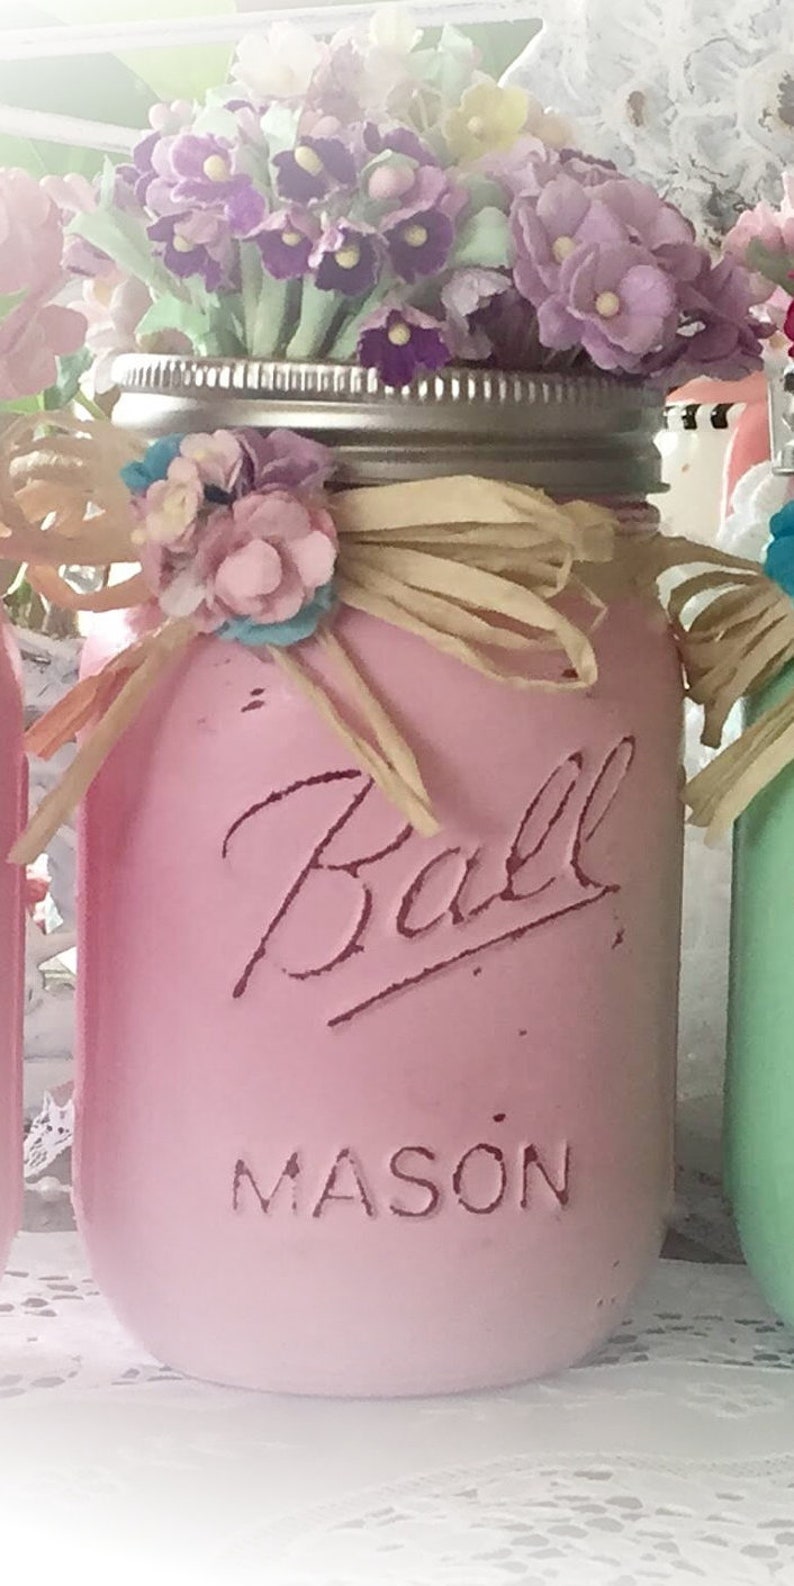 Shabby Chic Painted Mason Jars Centerpieces Home Decor Vases for Wedding Bridal/Baby Shower/Birthday Party/Mothers Day Hostess Gift Idea Pink